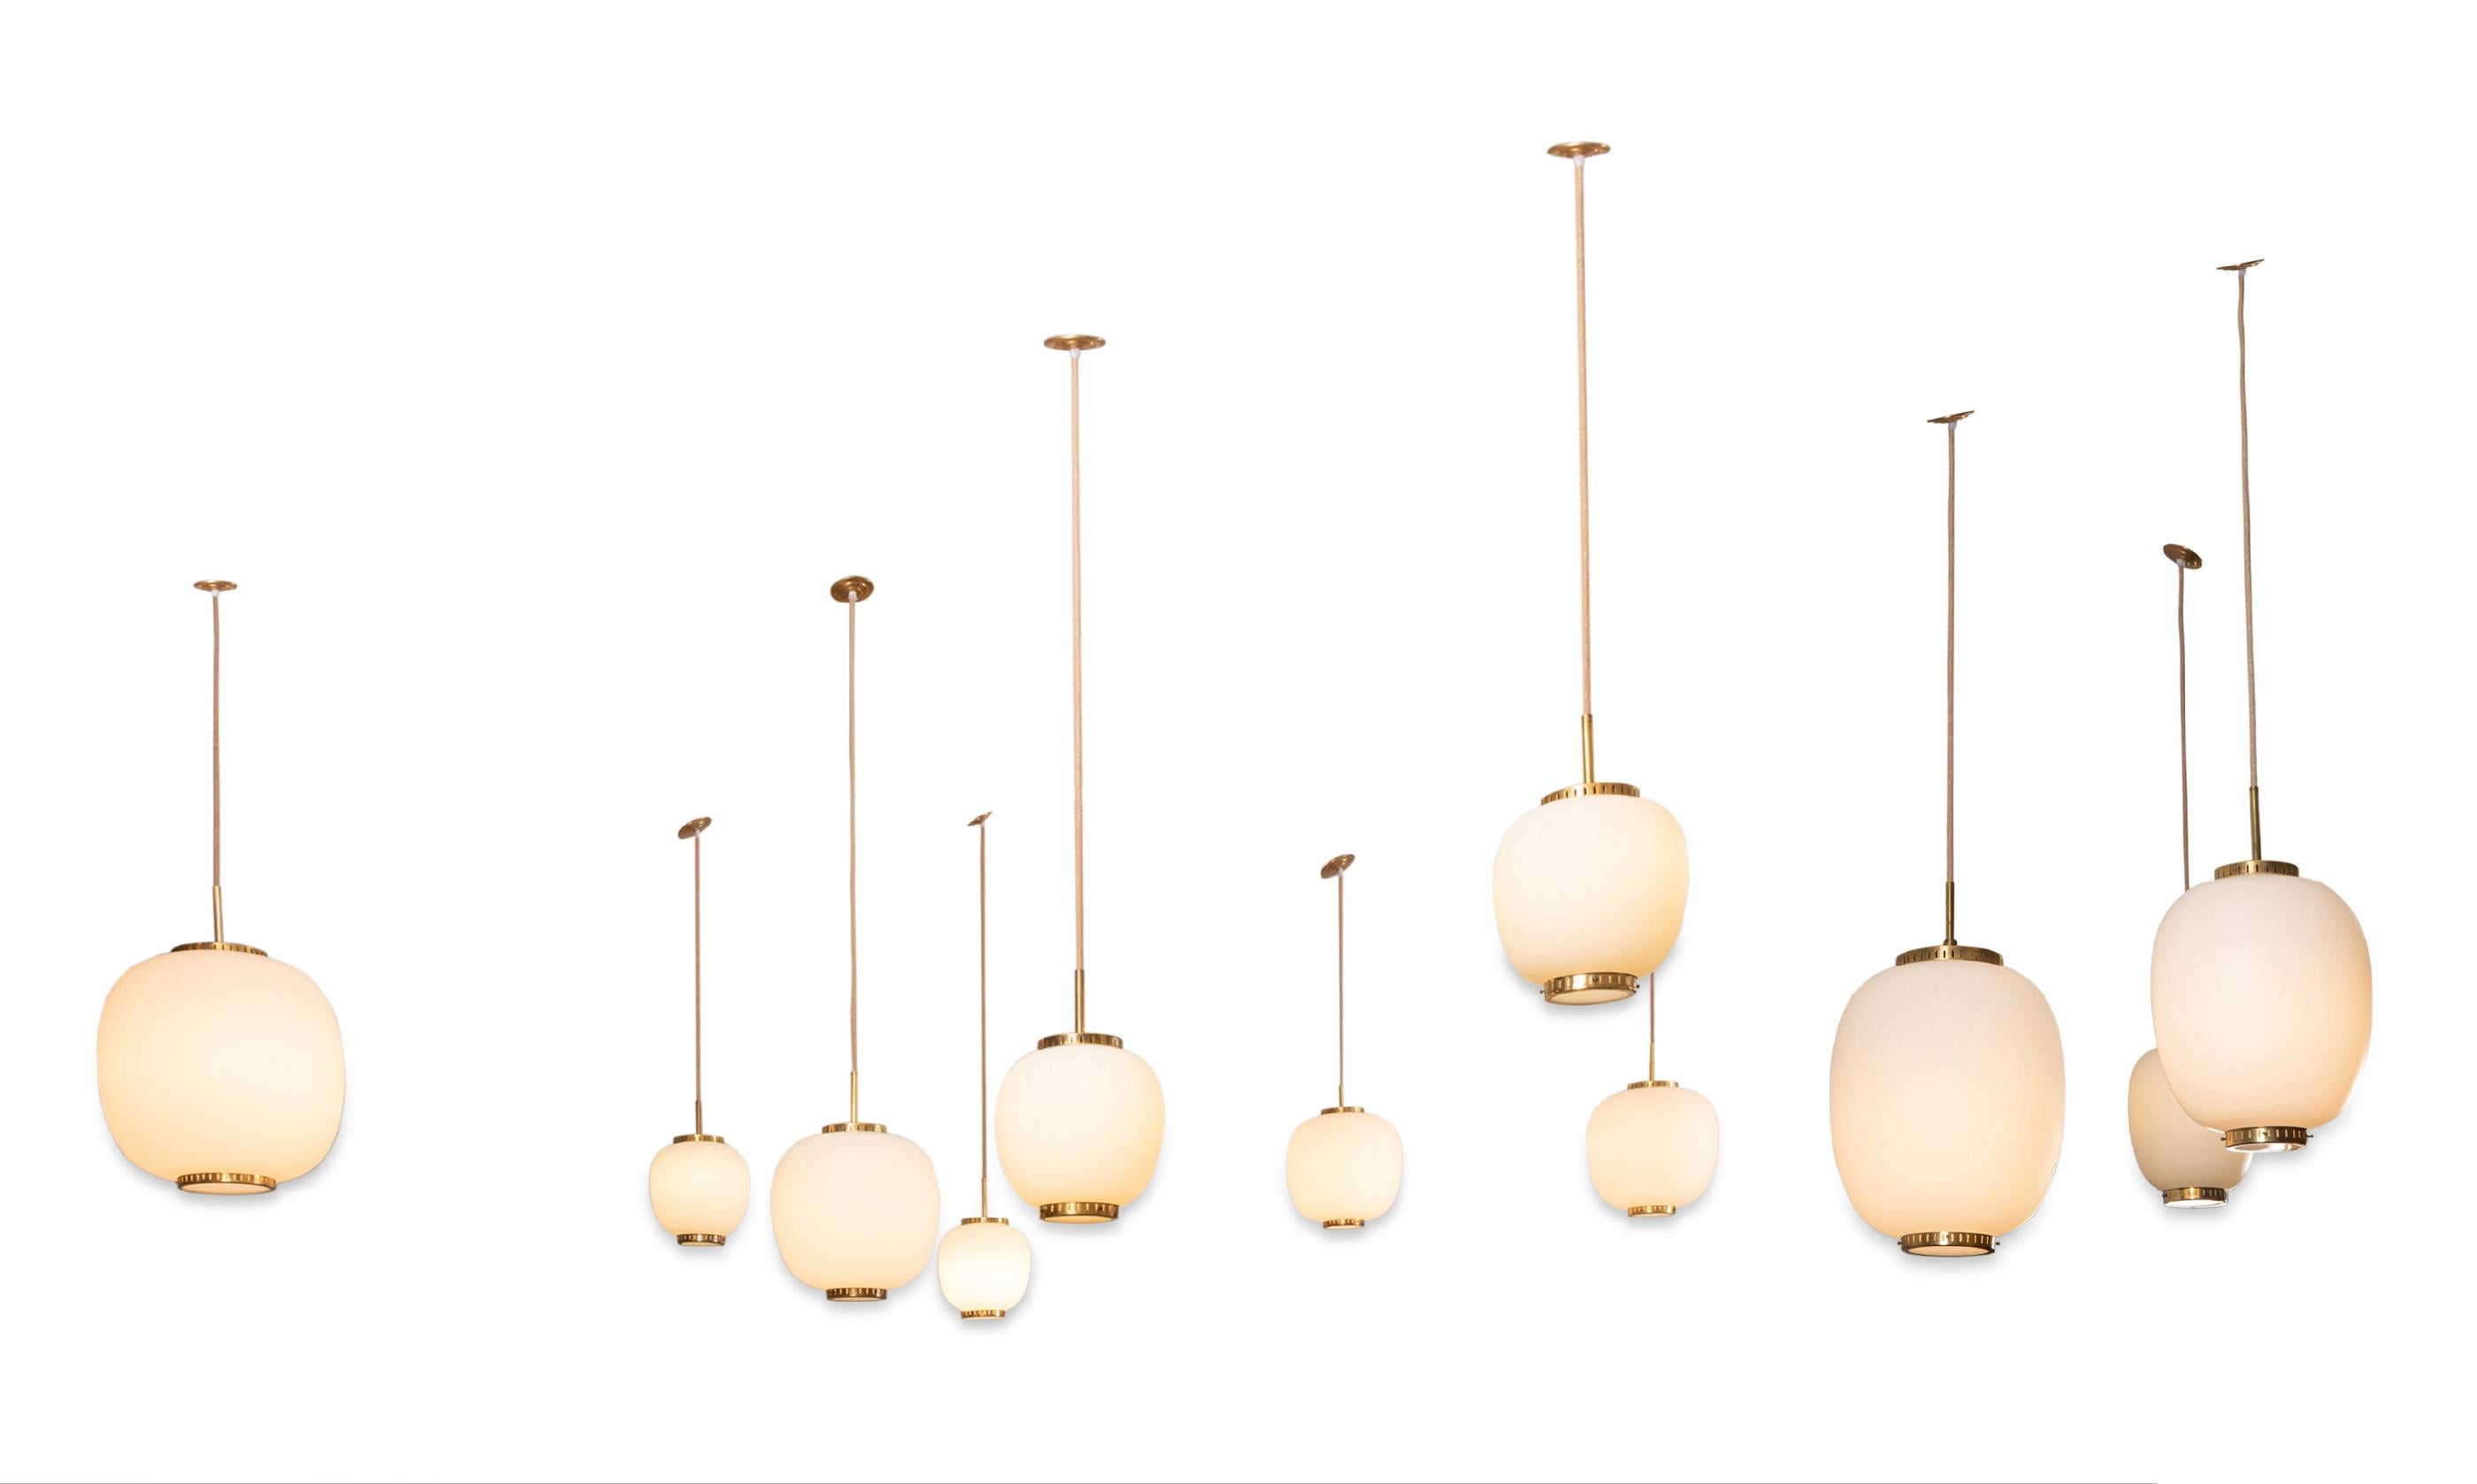 Collection of 11 opaline glass and brass ceiling fixtures.
See dimensions below
Designed by Bent Karlby for Lyfa.
Denmark, late 1950s.

Dimensions: (Height of the opaline + top and bottom brass discs)
 Very large (1 item available): H 15.7 in.